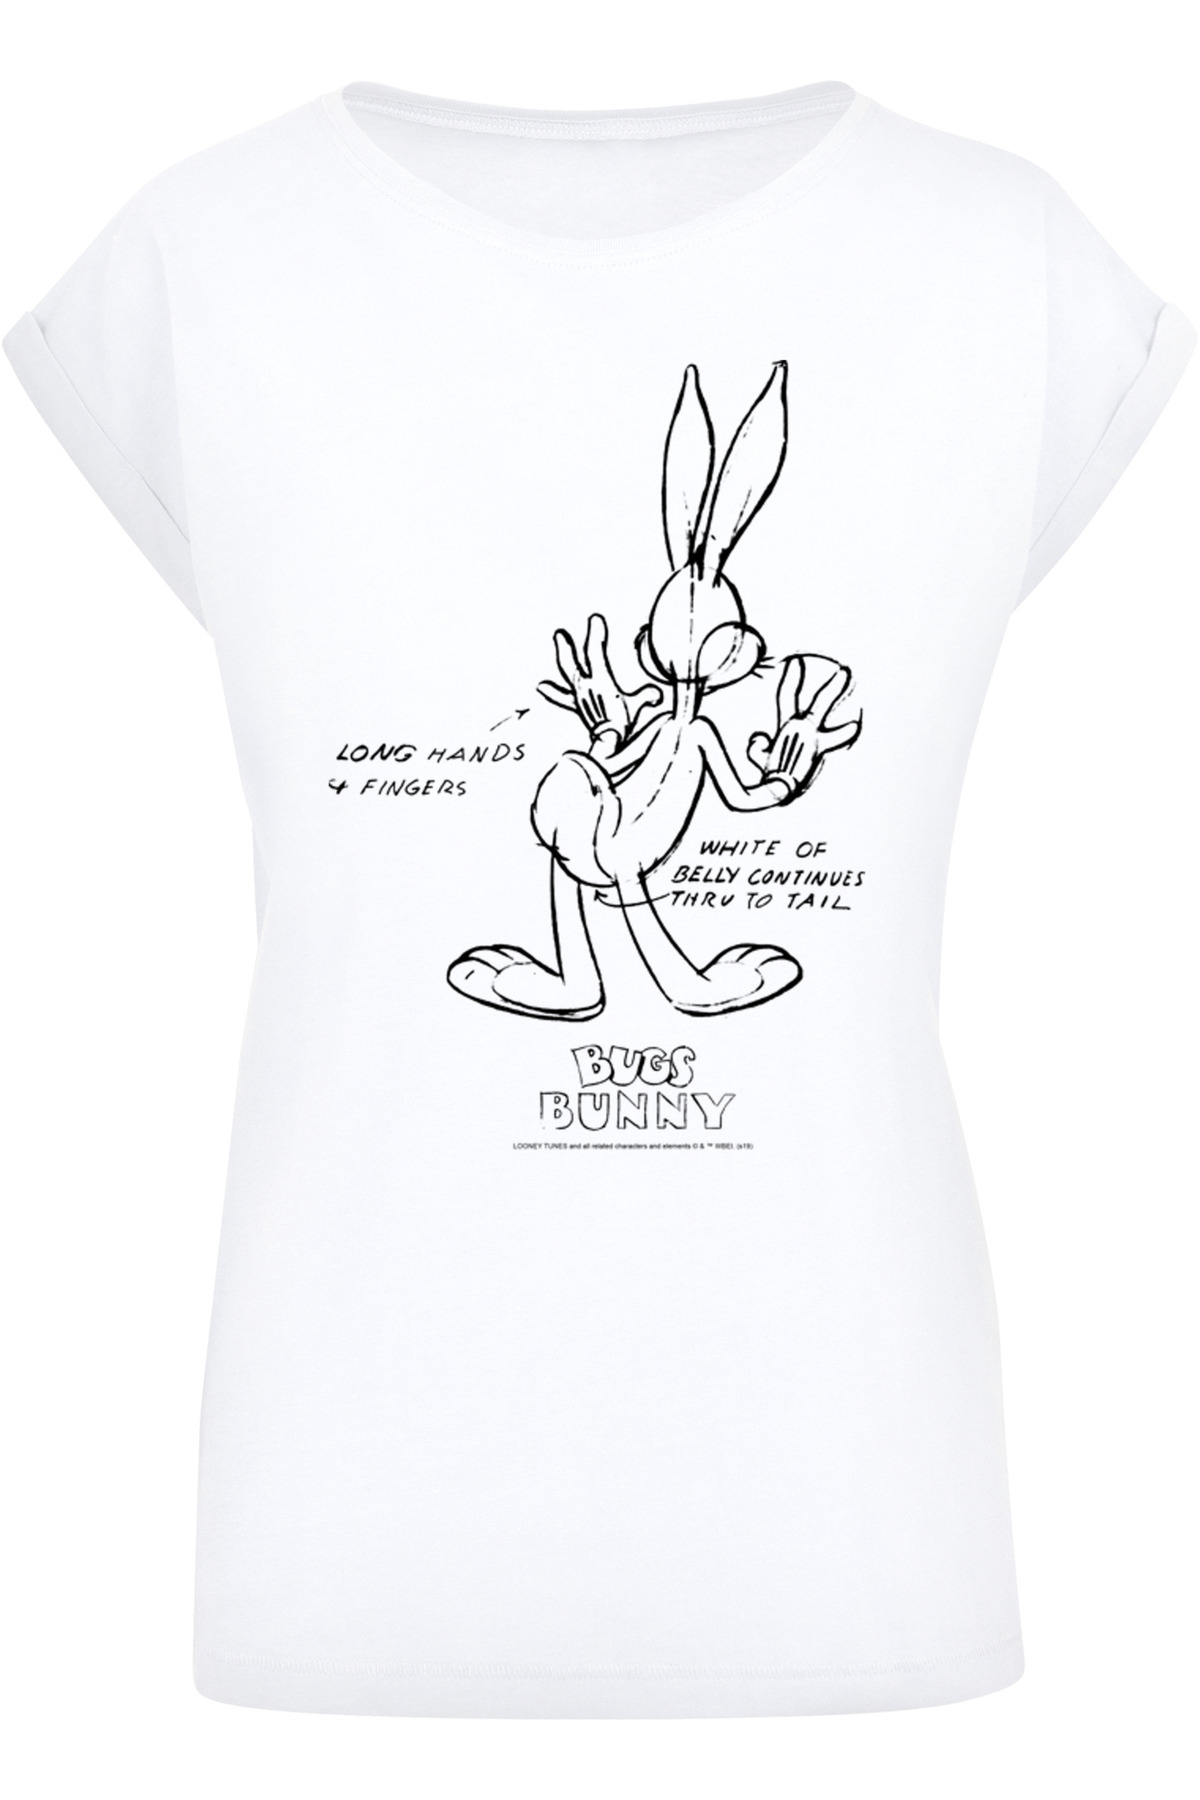 Tunes Ladies F4NT4STIC Bunny Belly-WHT Looney White Extended Damen Shoulder Trendyol Bugs mit - T-Shirt